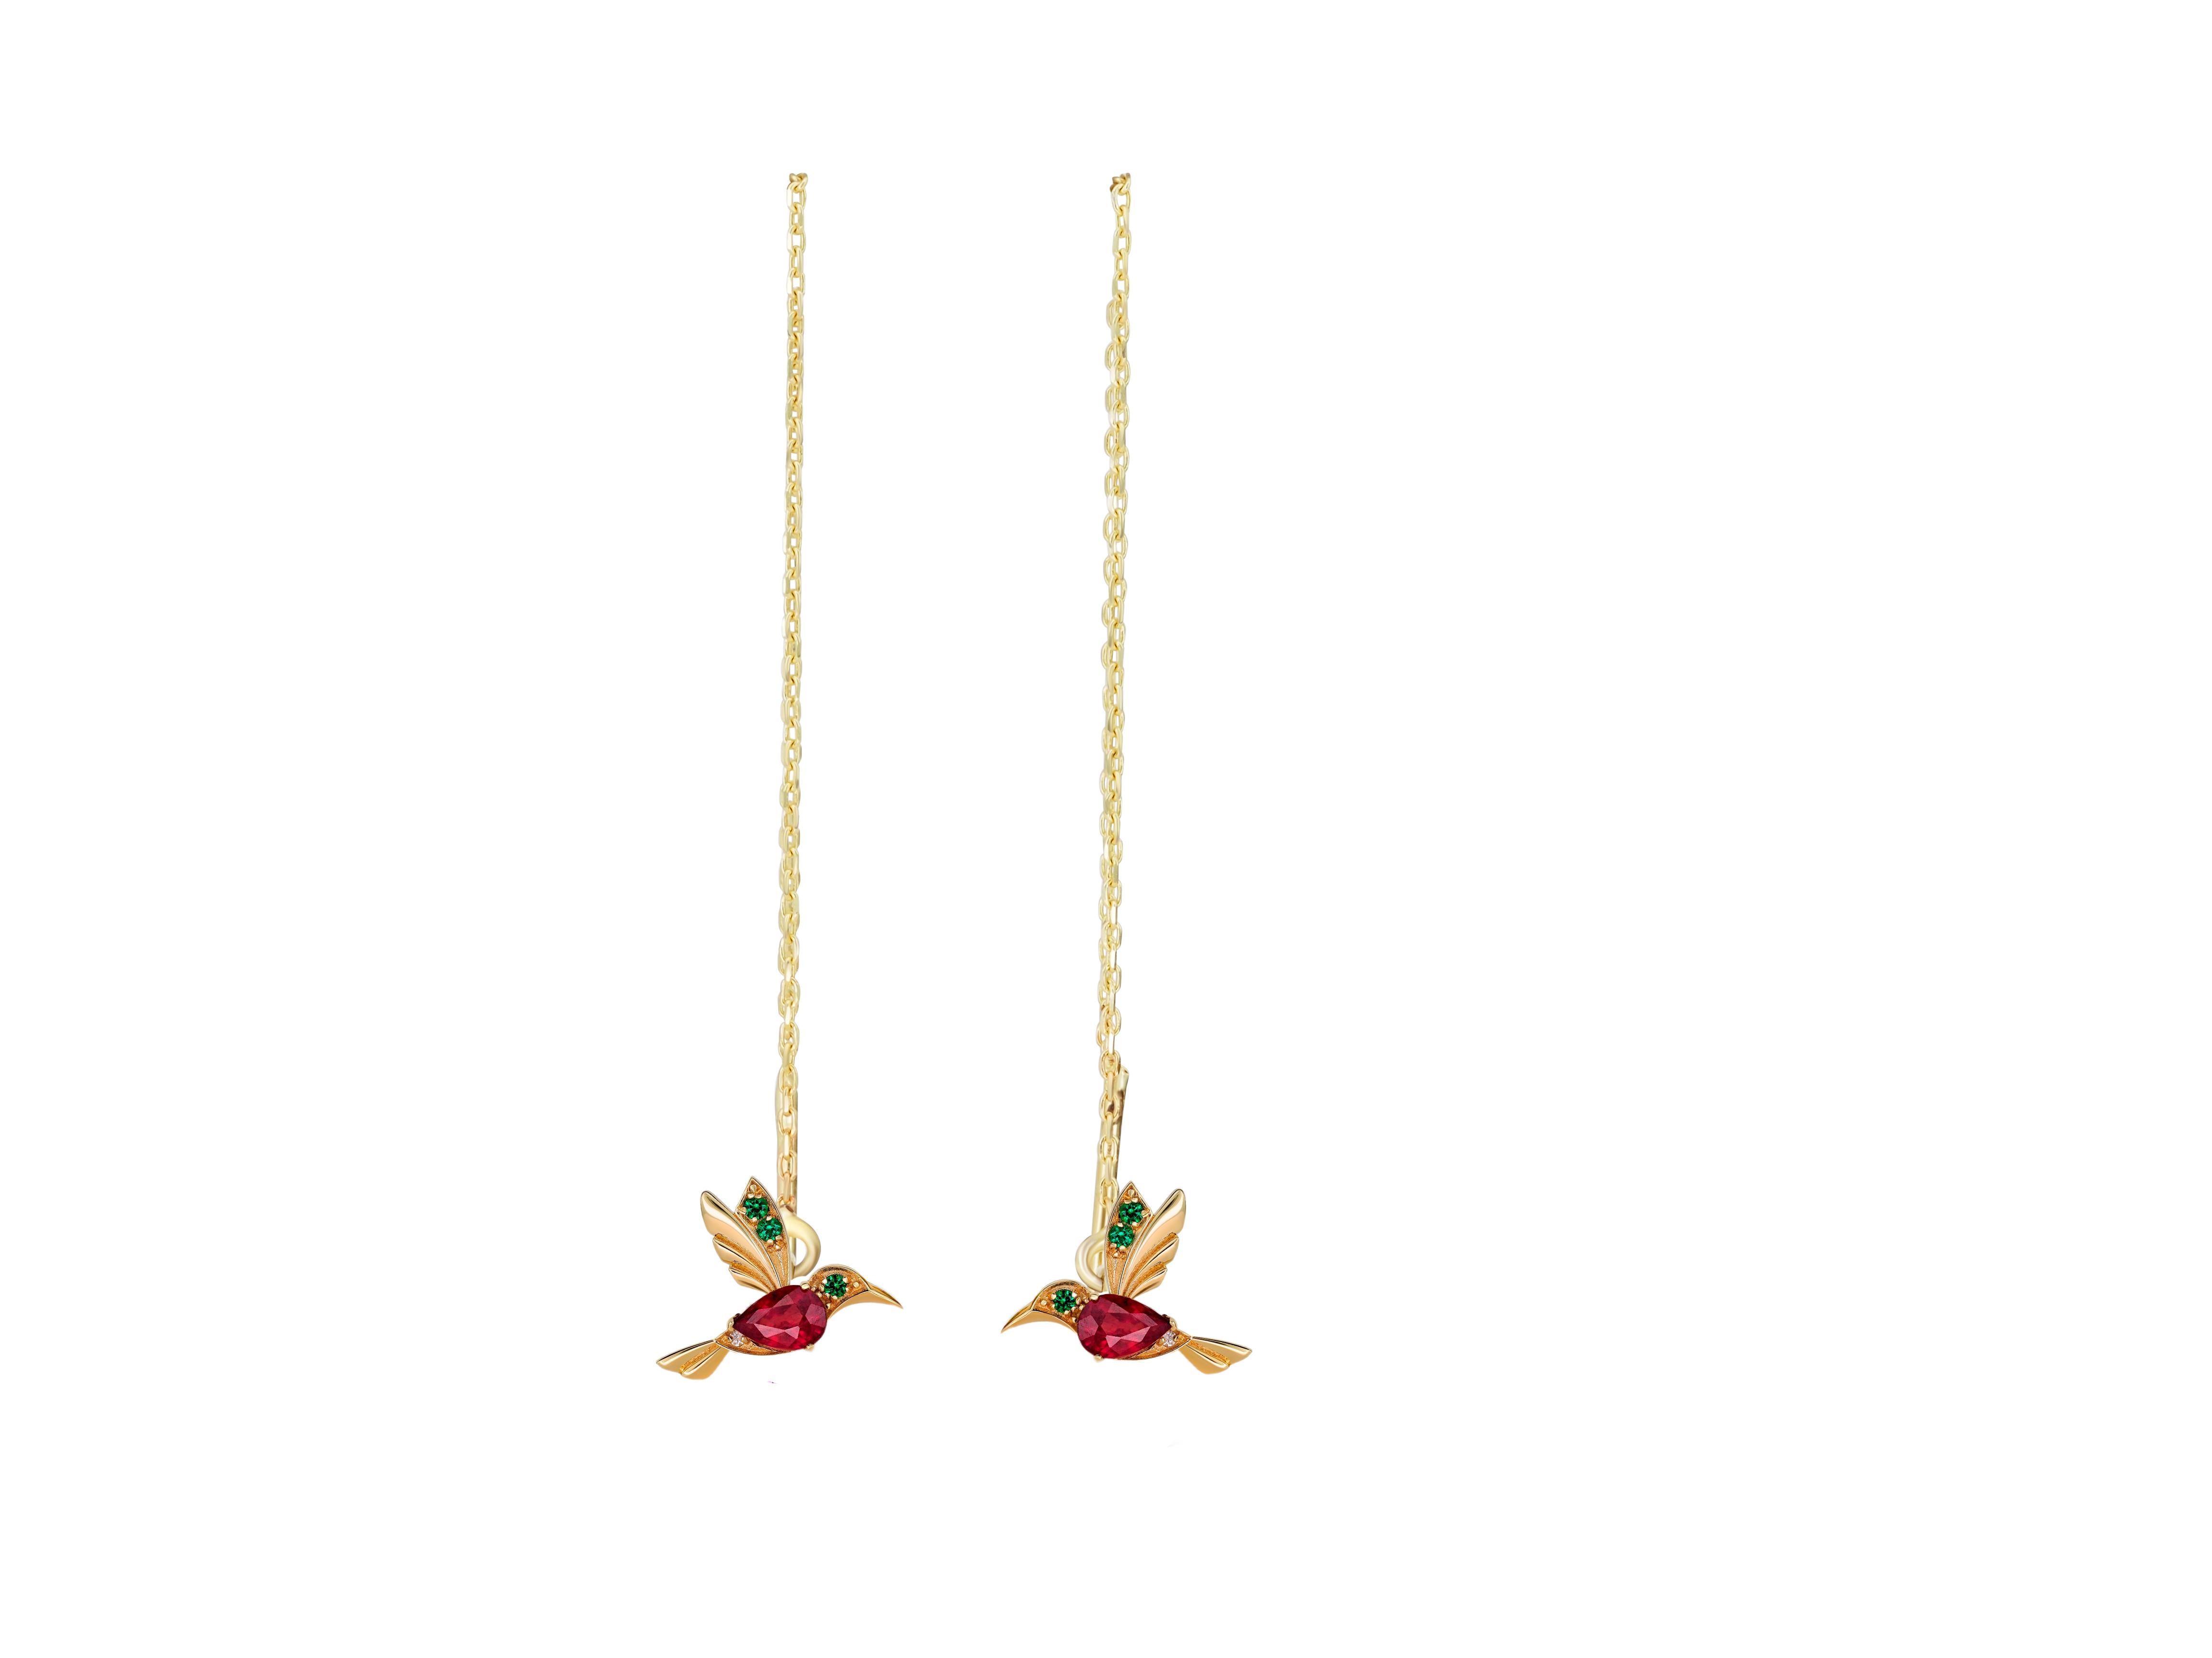 Modern Hummingbird Threader earrings with rubies in 14k gold.  For Sale